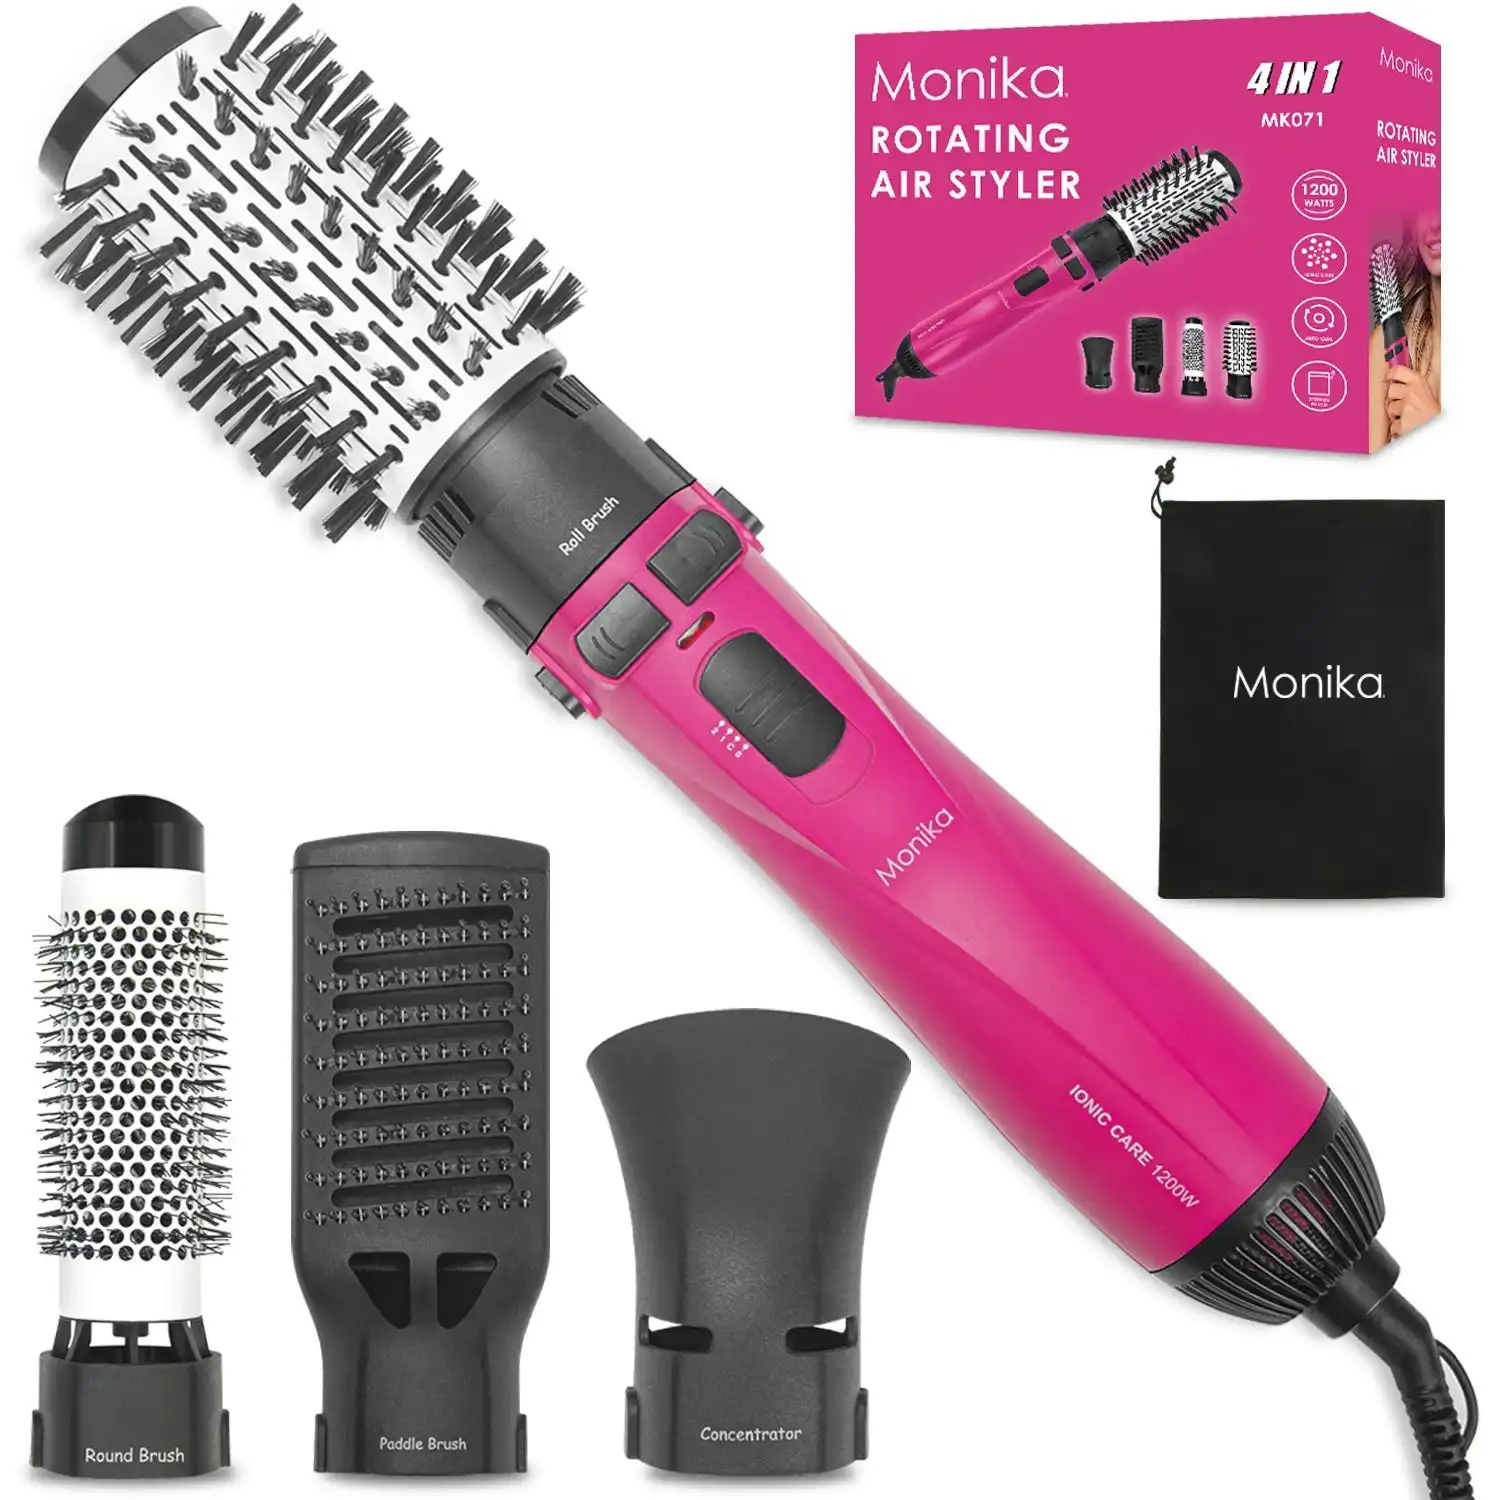 Monika 4 in 1 1200W Hair Styler Auto Curler Hot Air Brush w/ Ionic Care Tech Straightening Curling Blow Drying